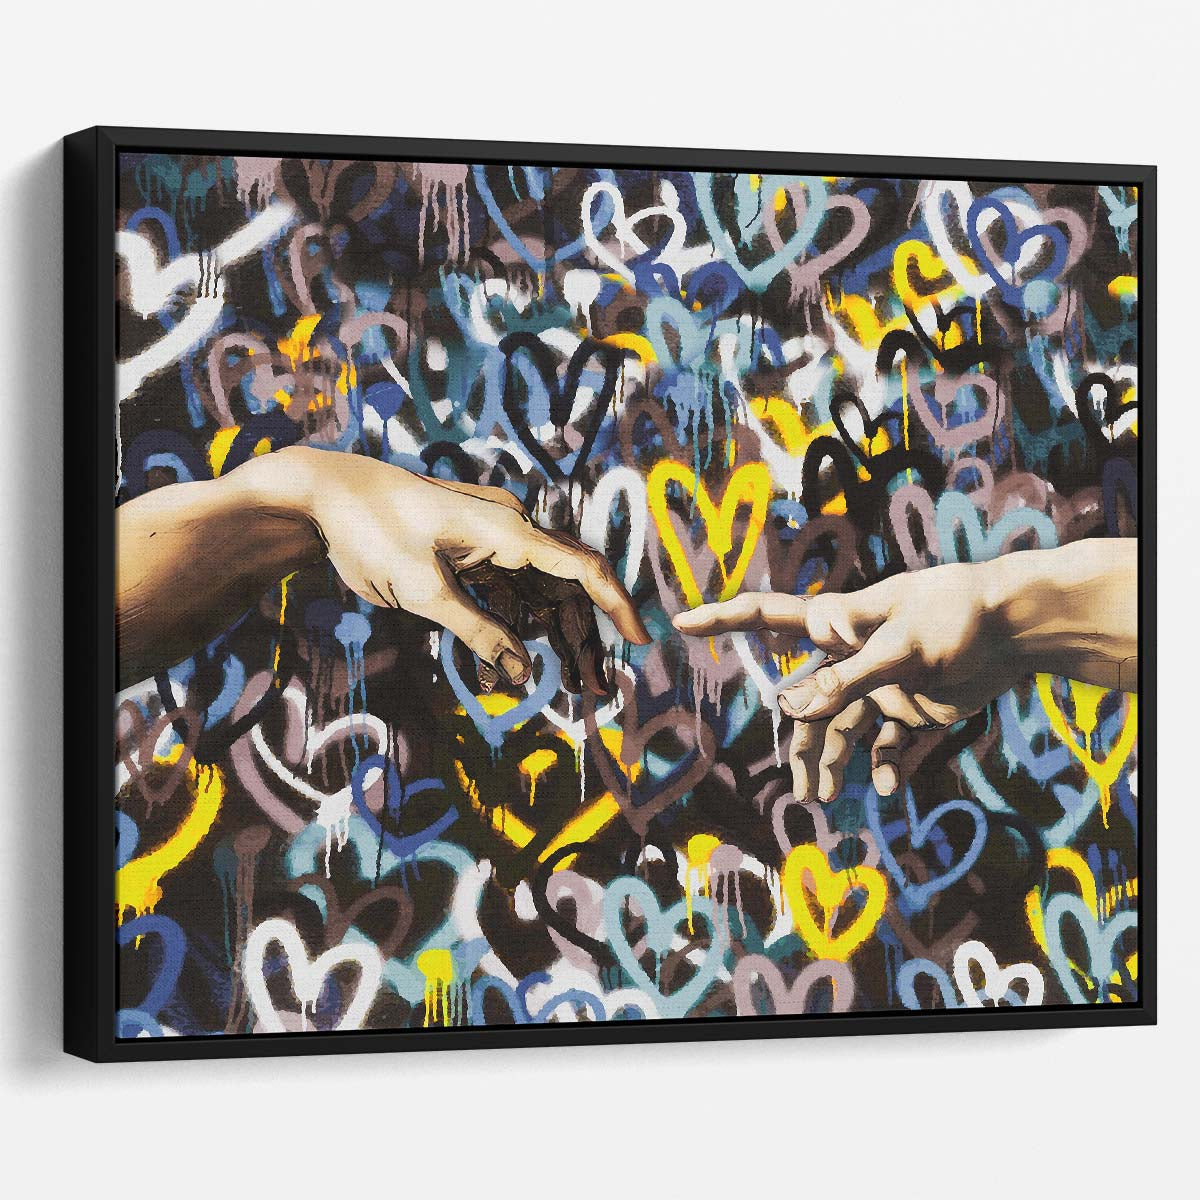 Hands Love Touch Graffiti Dark Background Wall Art by Luxuriance Designs. Made in USA.